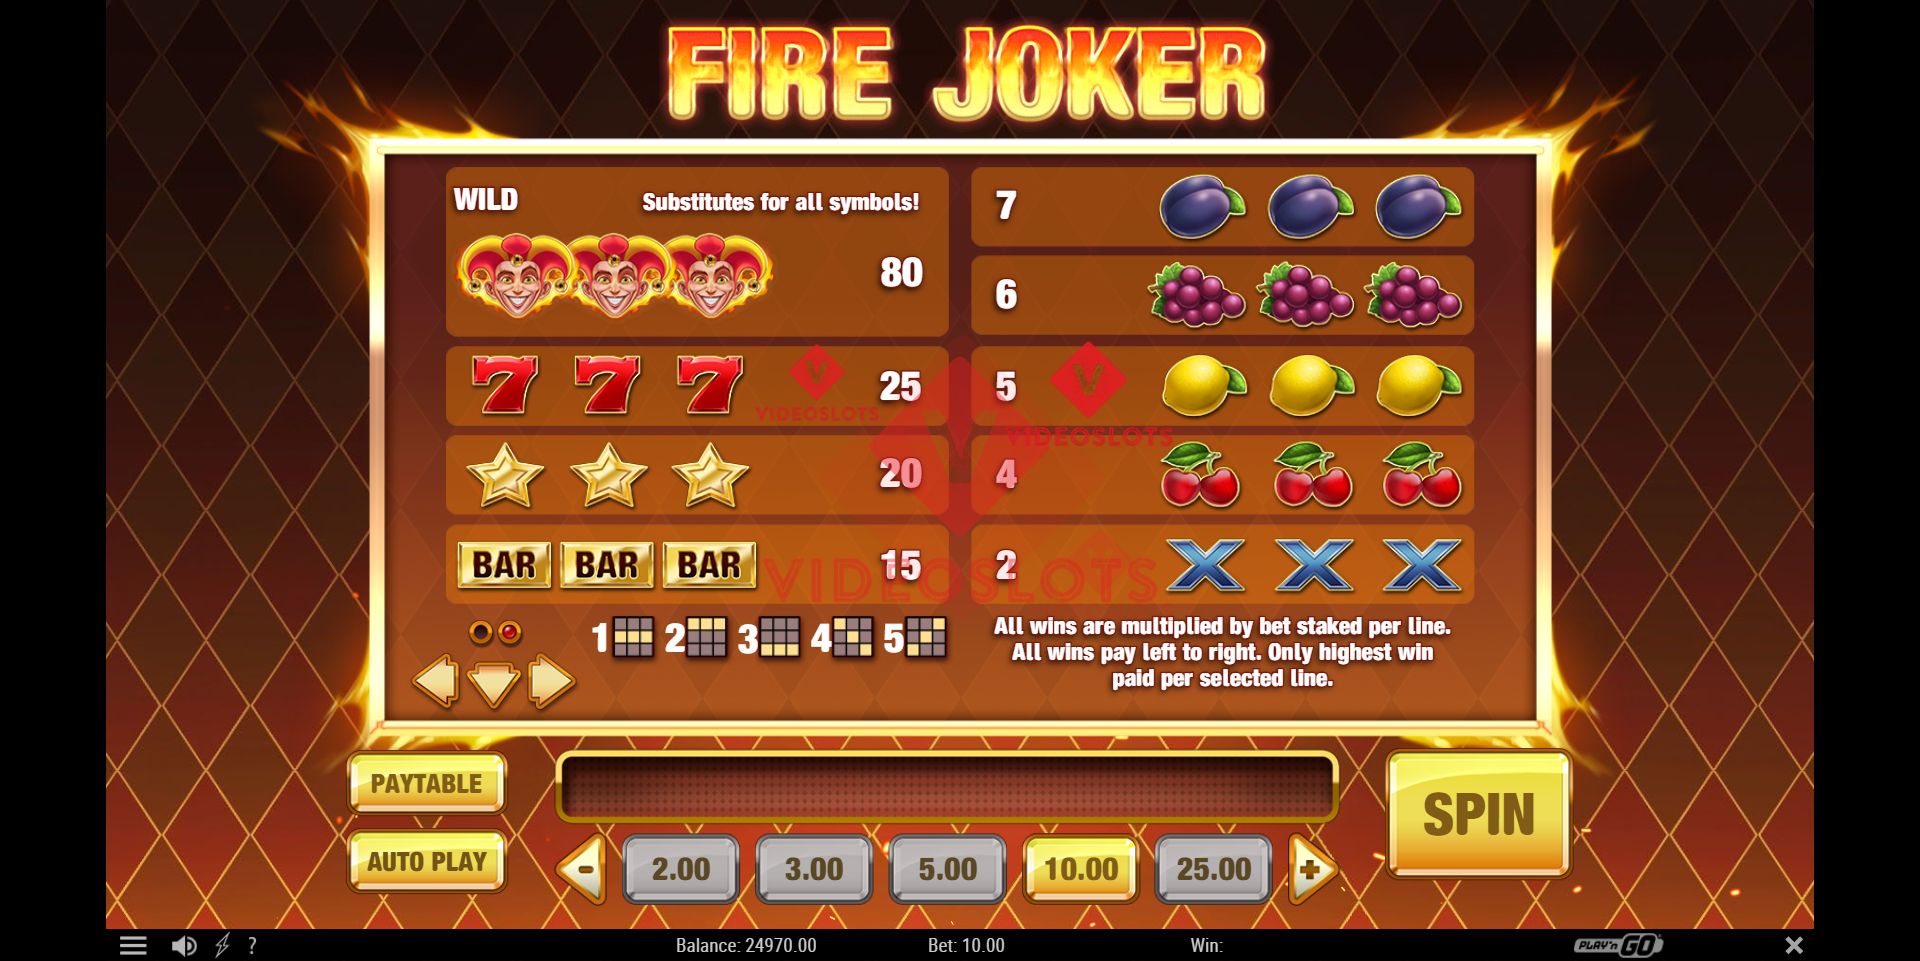 Pay Table for Fire Joker slot from Play'n Go